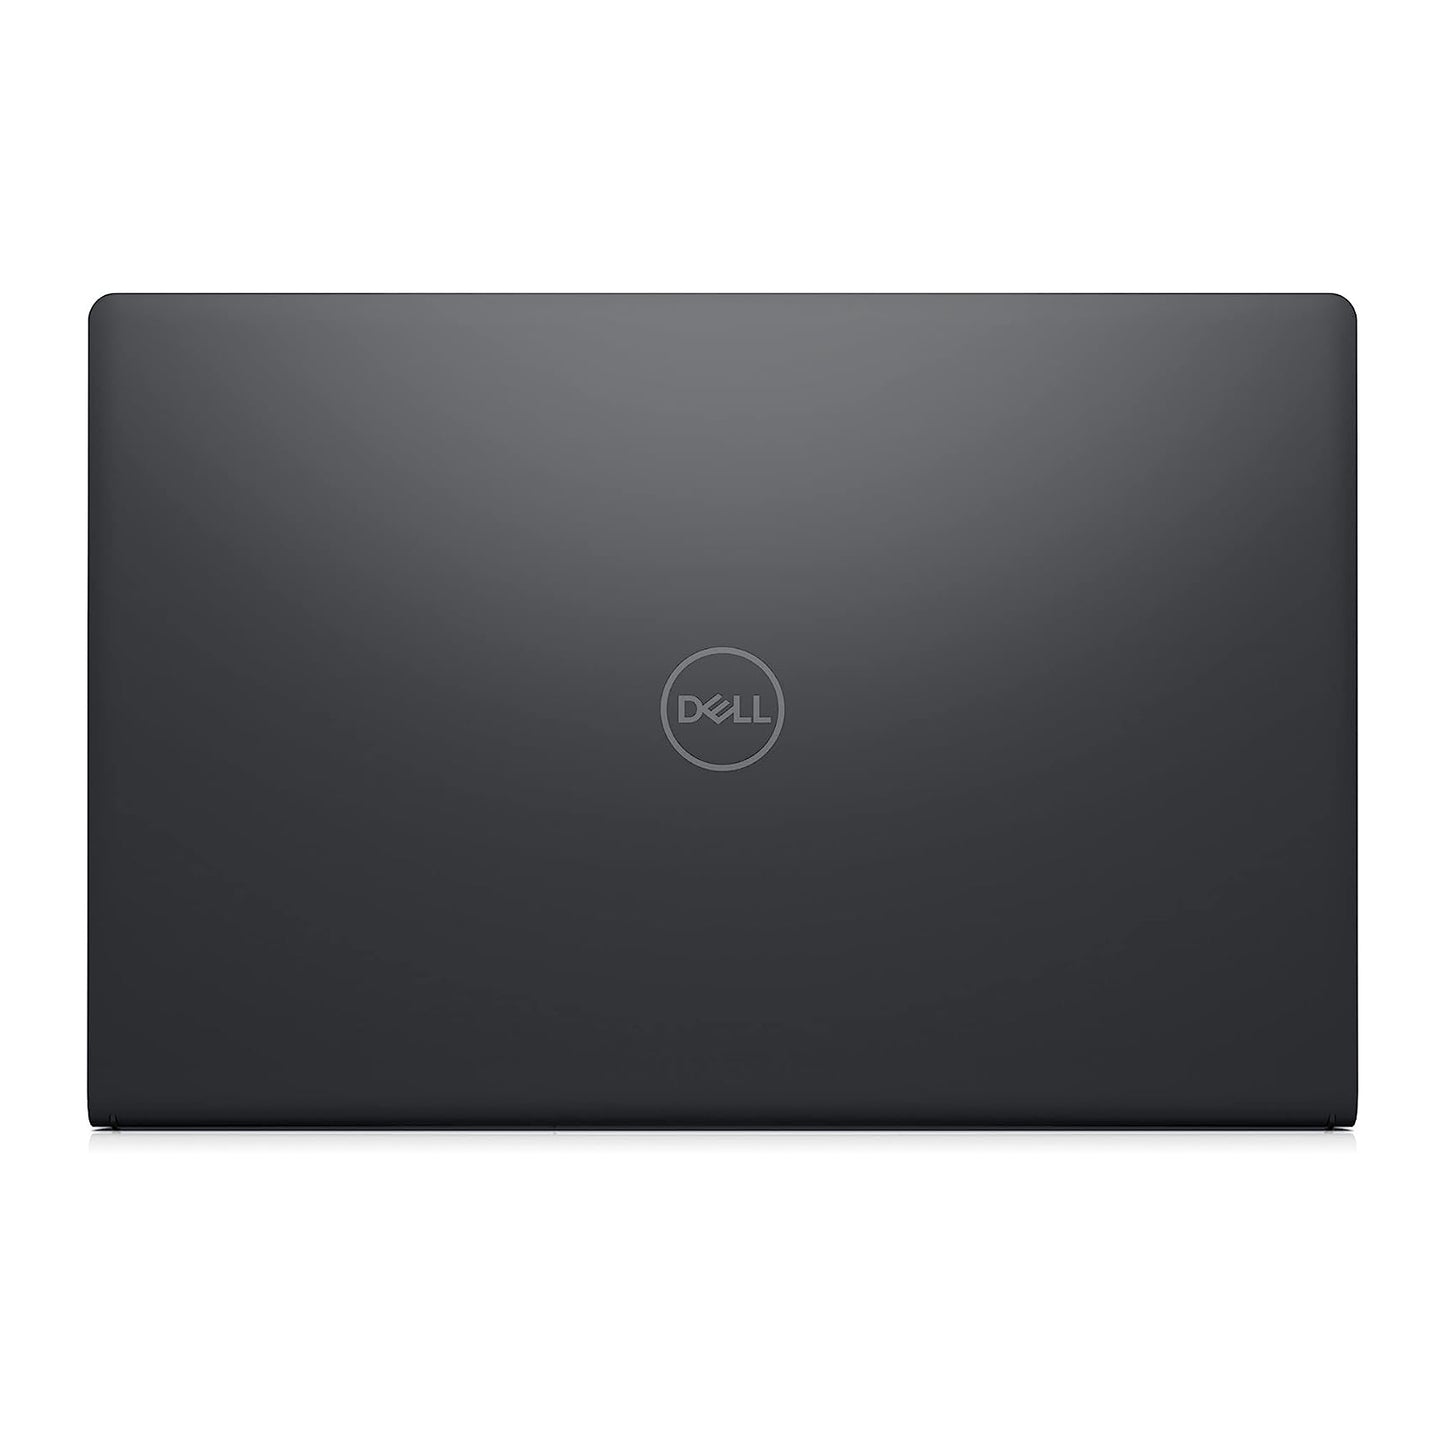 Dell Inspiron 15 3511 Core i5 15.6" Fhd Laptop Offers (New OB)